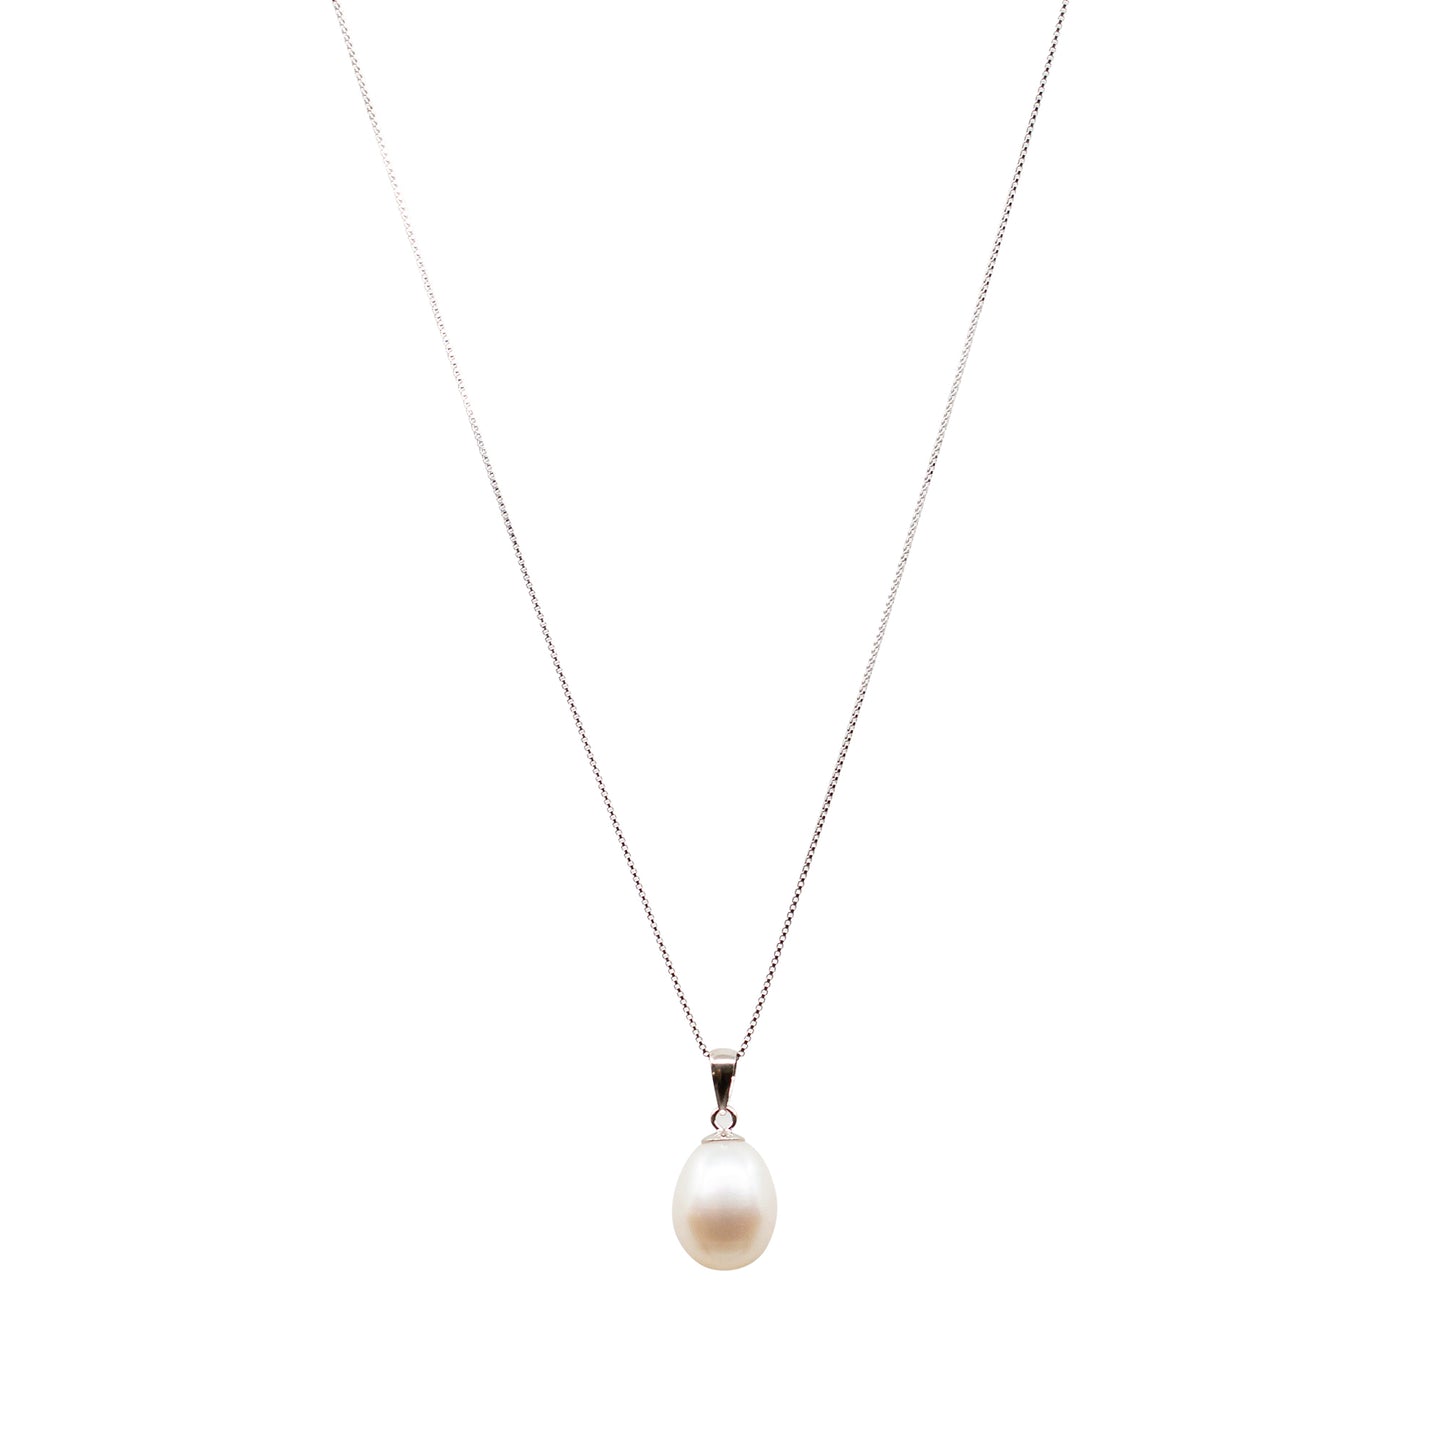 Liliana - Sterling Silver and Freshwater Pearl Pendant Necklace